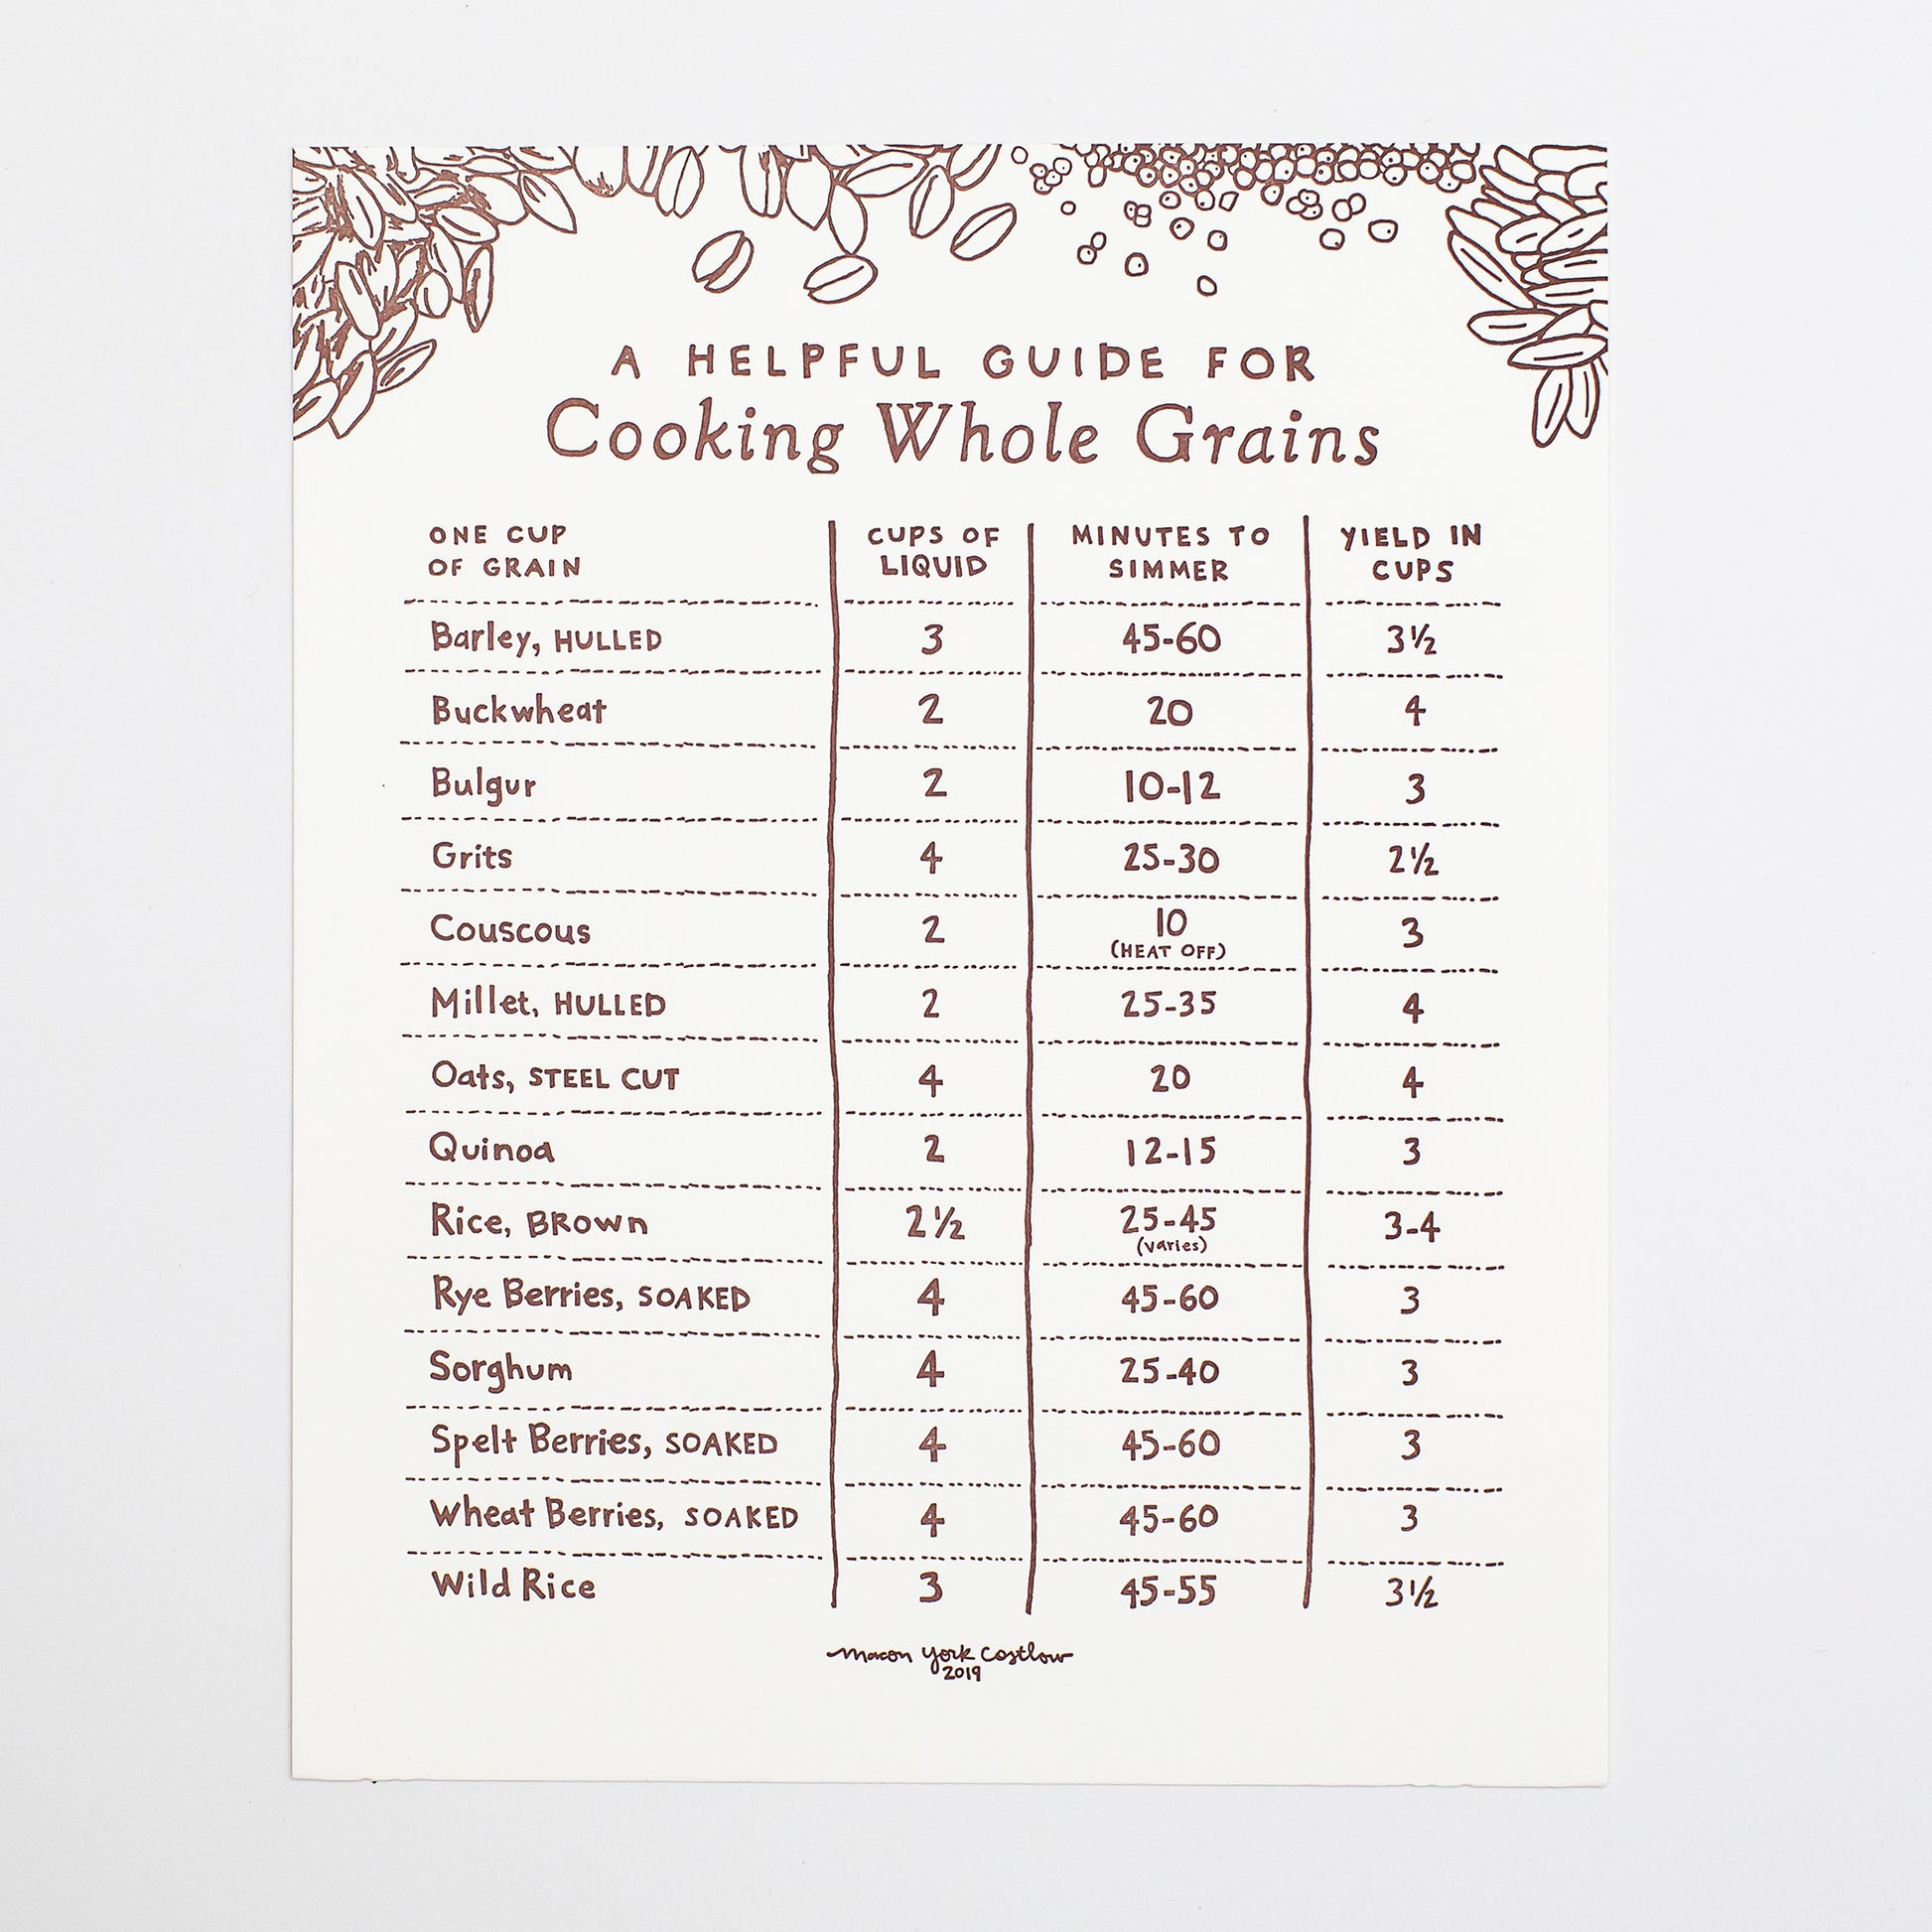 8x10 Letterpress Art Print - Helpful Guide to Cooking Whole Grains to hang in the kitchen to be a quick and easy reference for how much water to add to a cup of grains and how long to cook. Great gift for newlyweds, hostess gift, vegans and vegetarians, and more! Text is hand-drawn. Letterpress tactile texture.